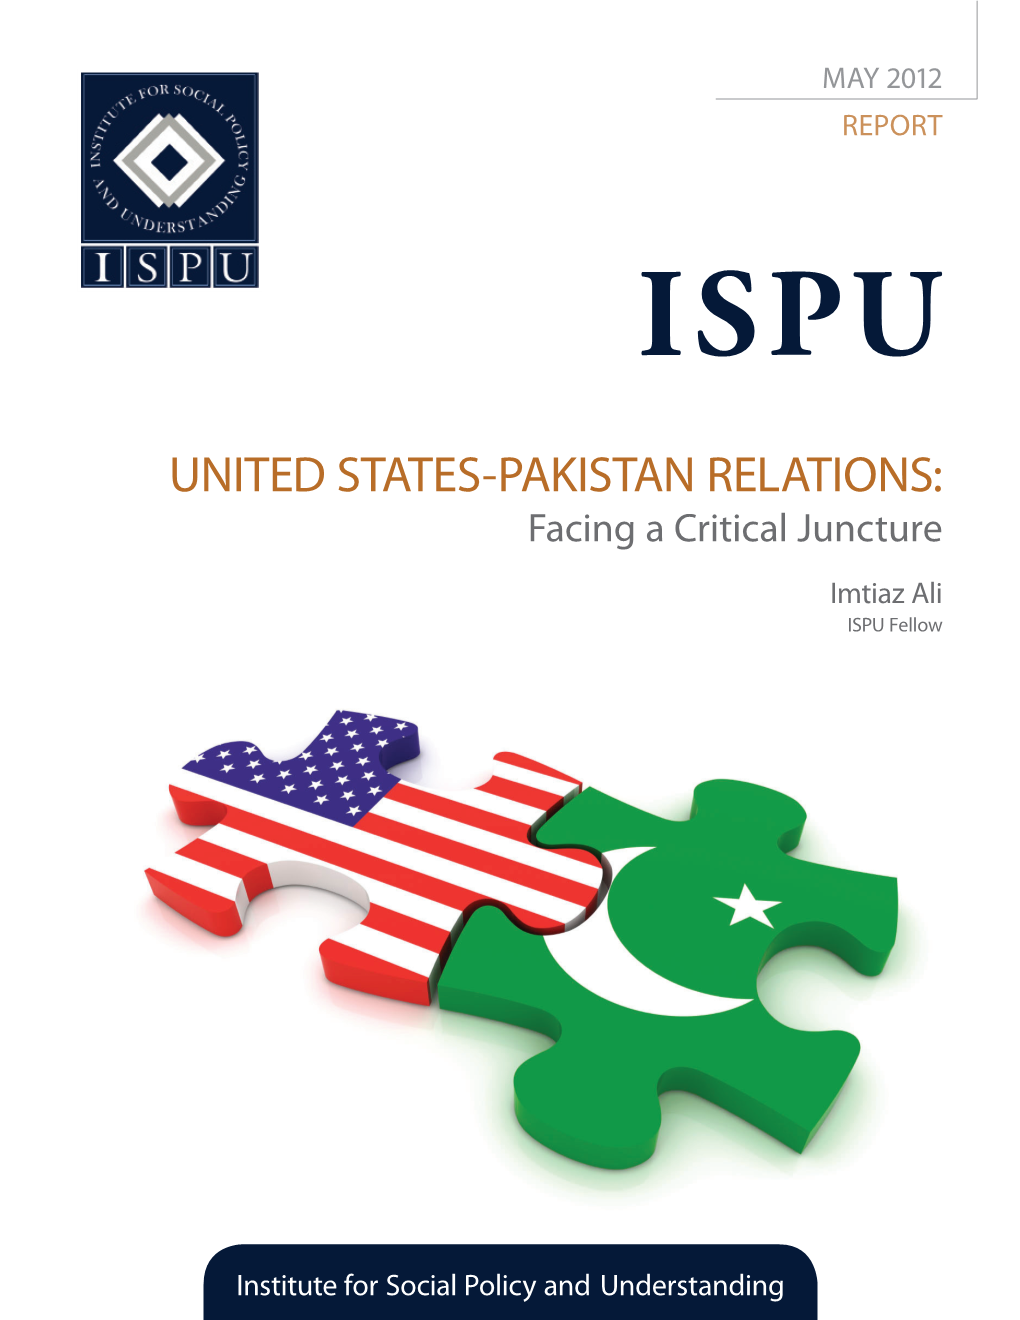 UNITED STATES-PAKISTAN RELATIONS: Facing a Critical Juncture